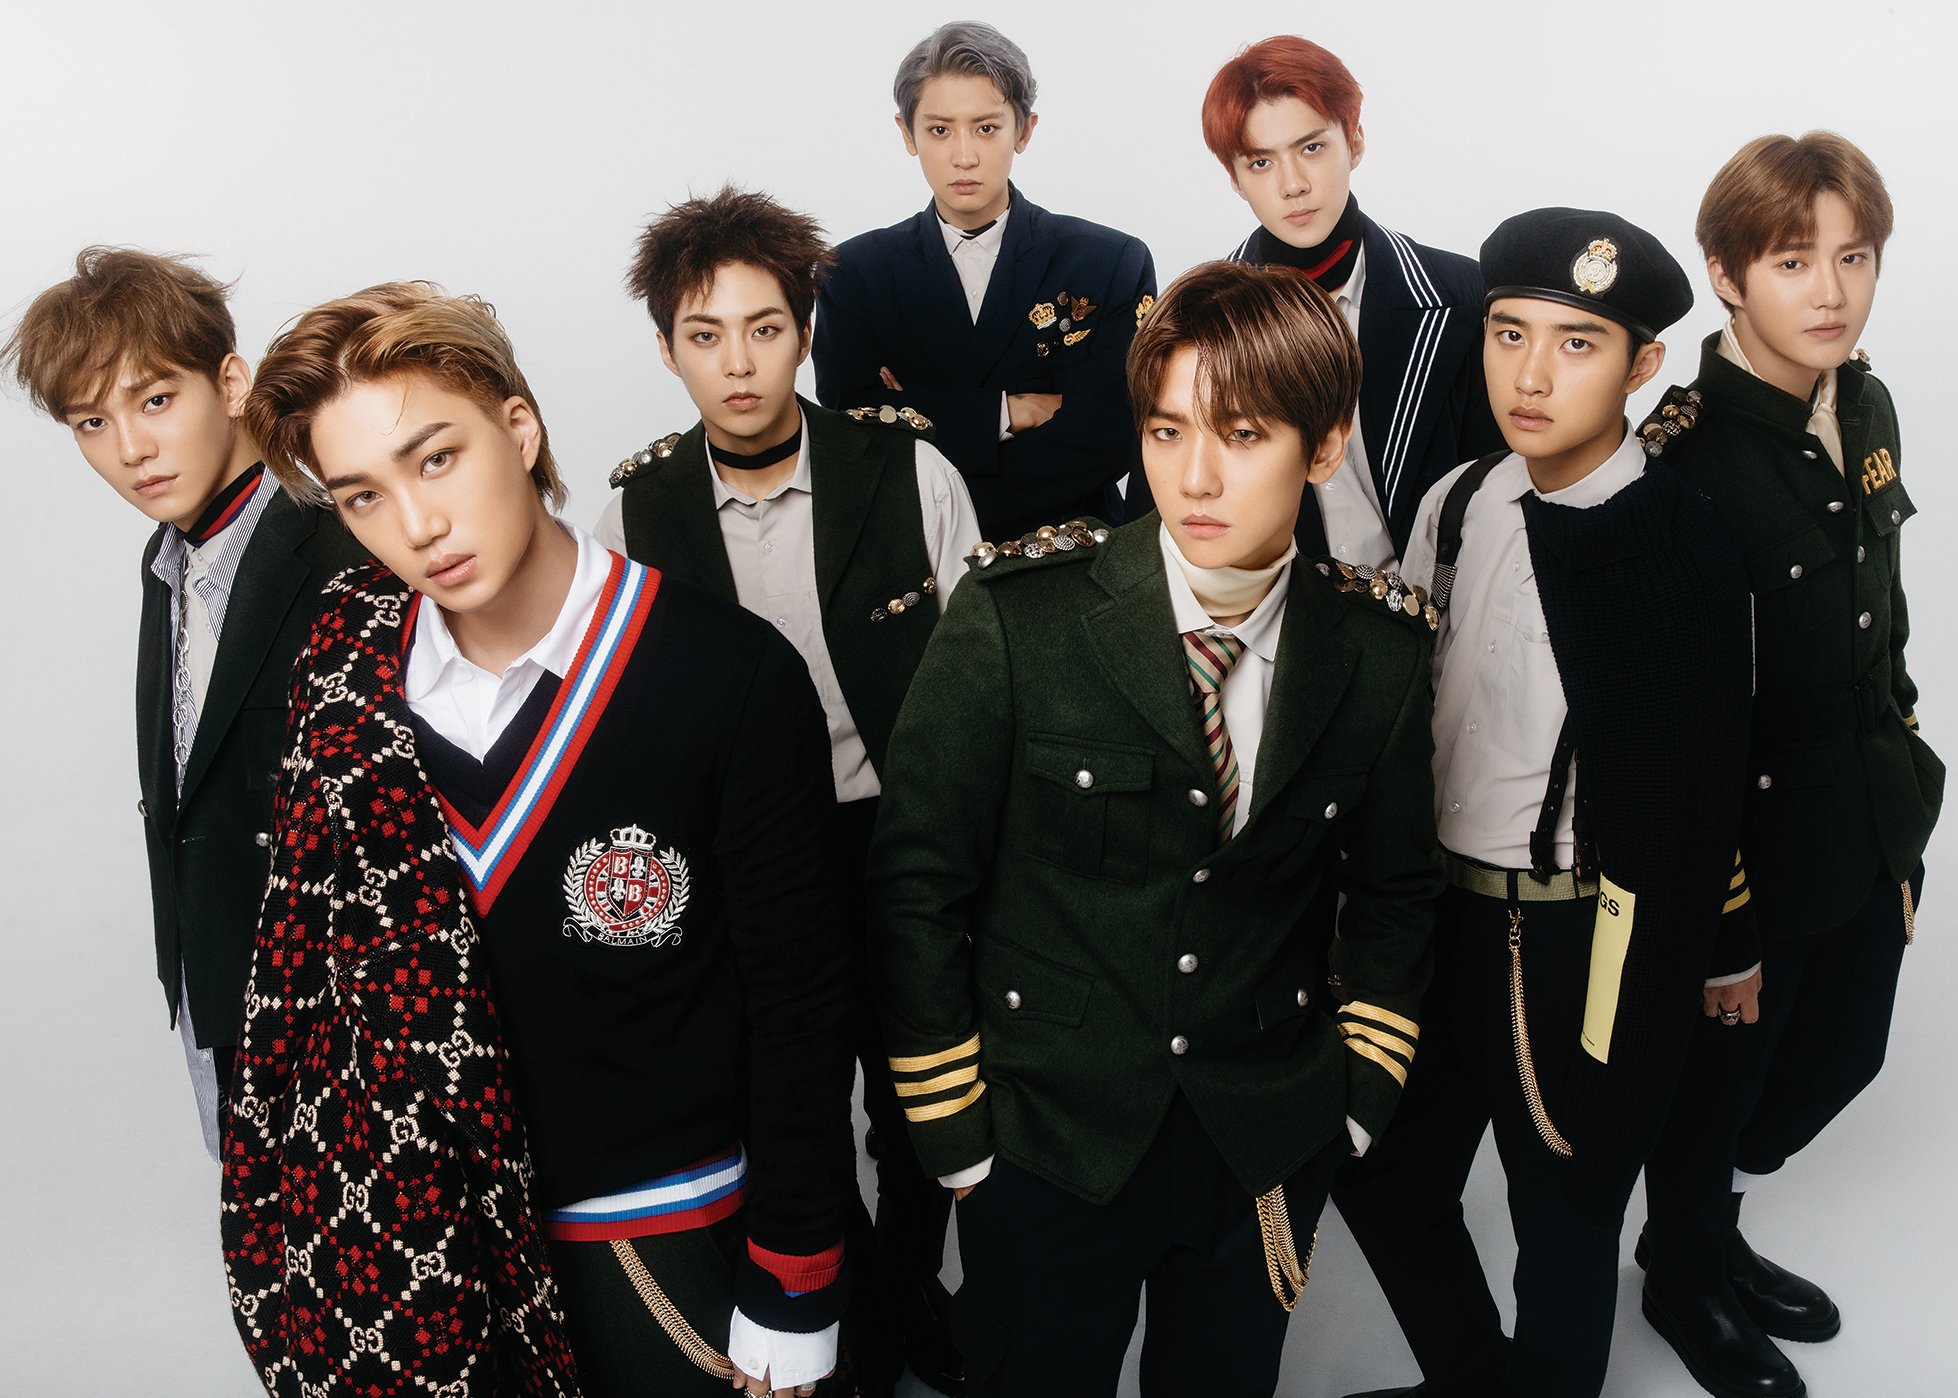 The full story behind why EXO started with 12 members, and now has 9 - Koreaboo